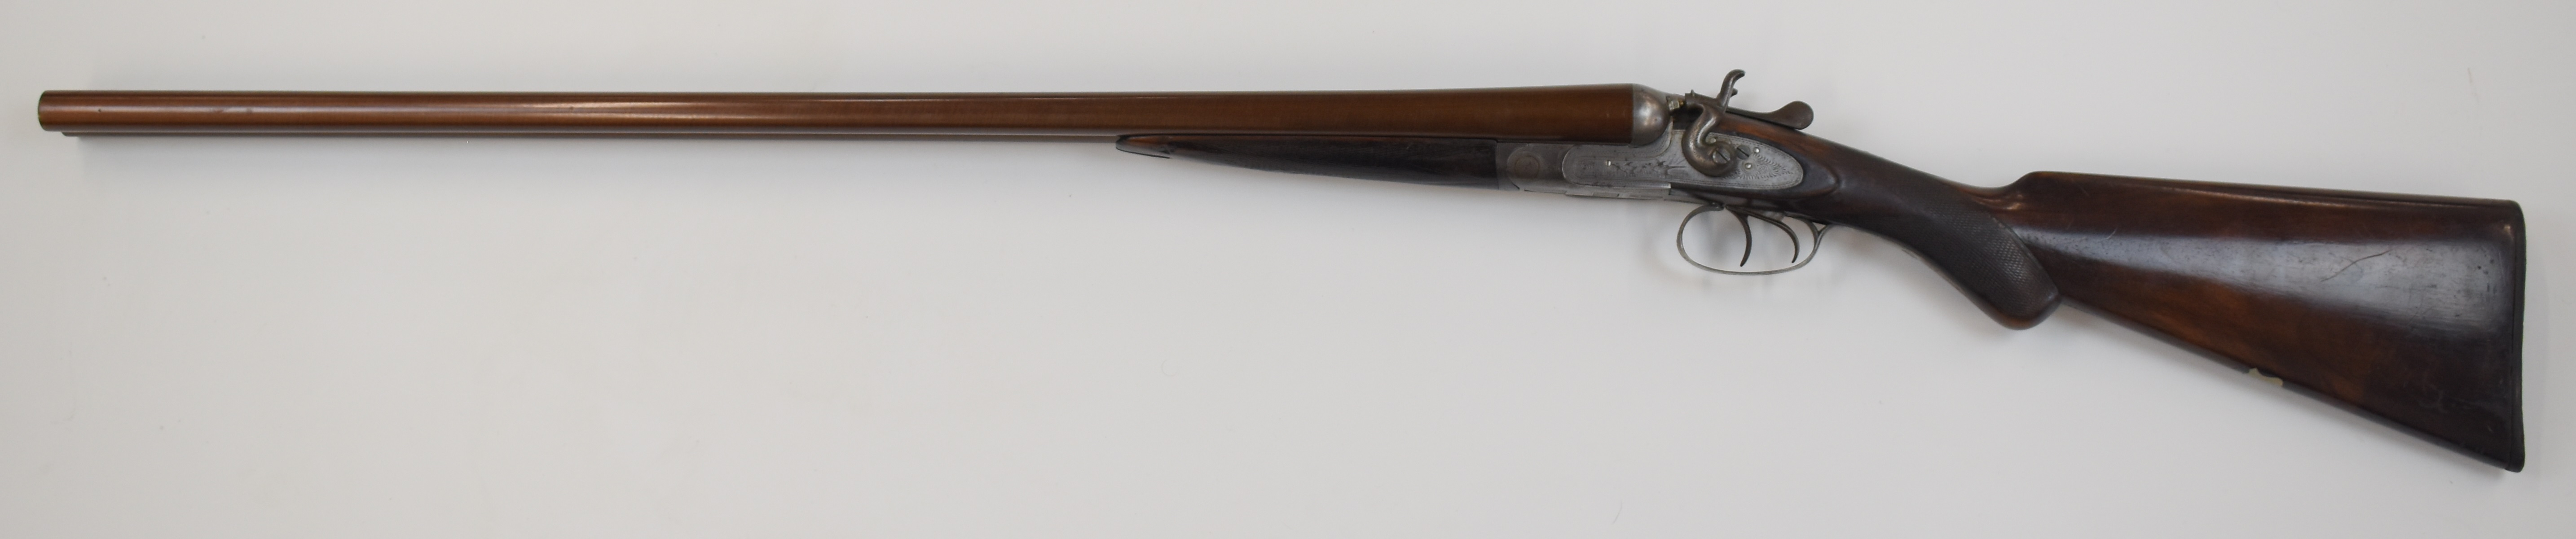 Skimin & Wood 12 bore side by side hammer action shotgun with engraved scenes of birds to the locks, - Image 6 of 12